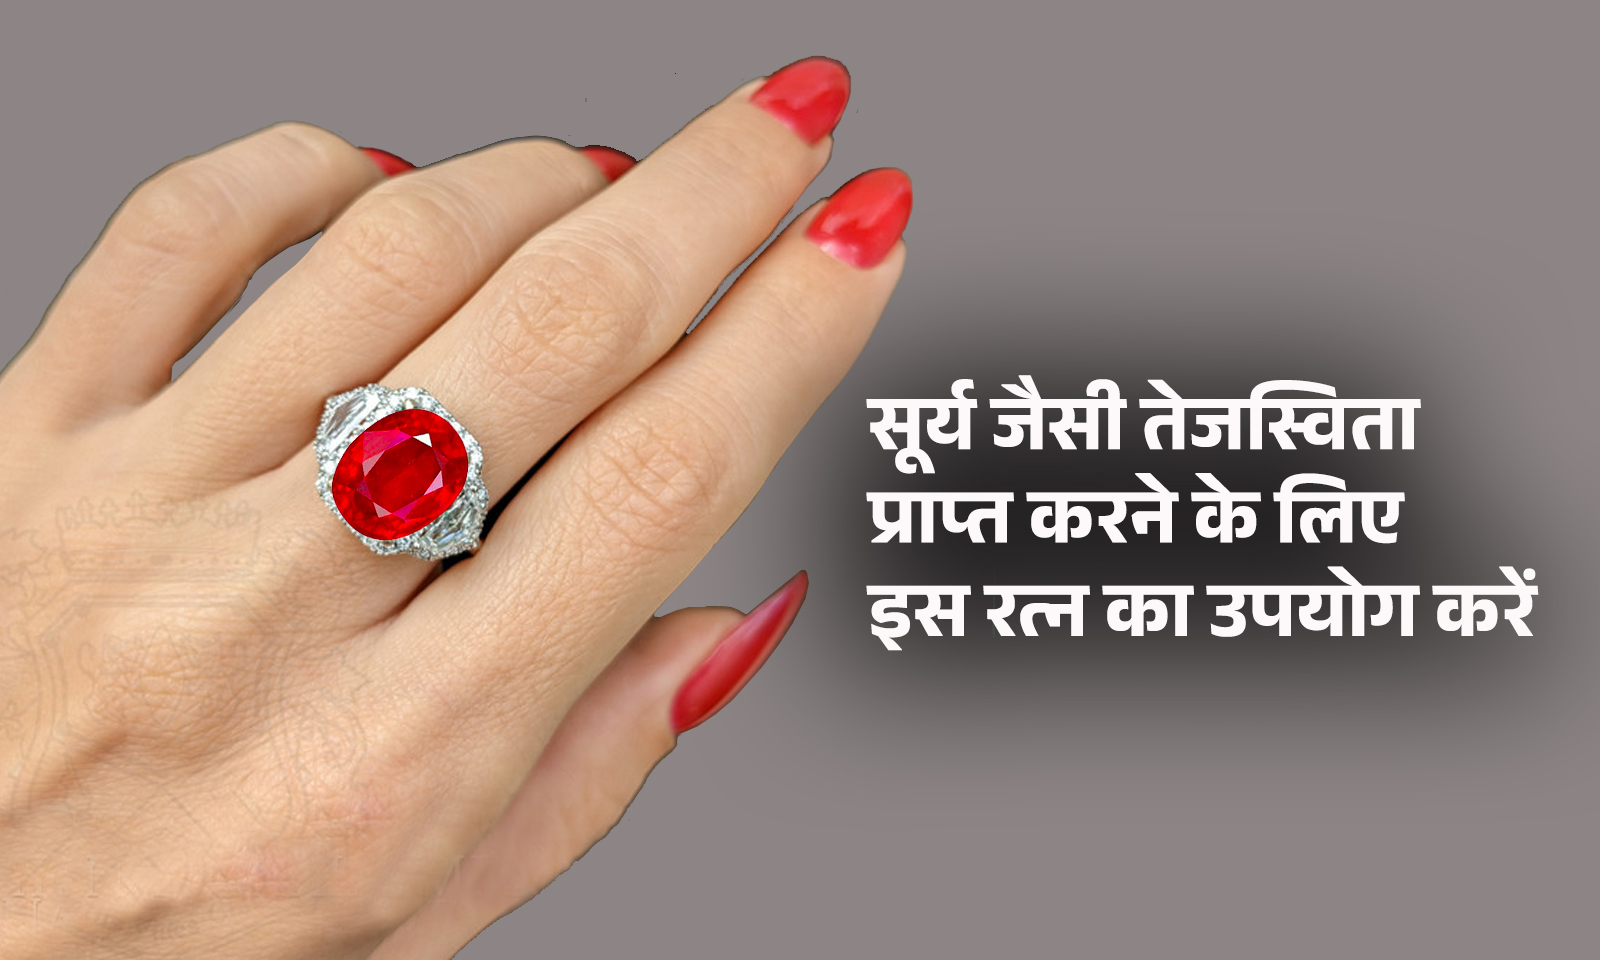 Benefits of Ruby in Hindi